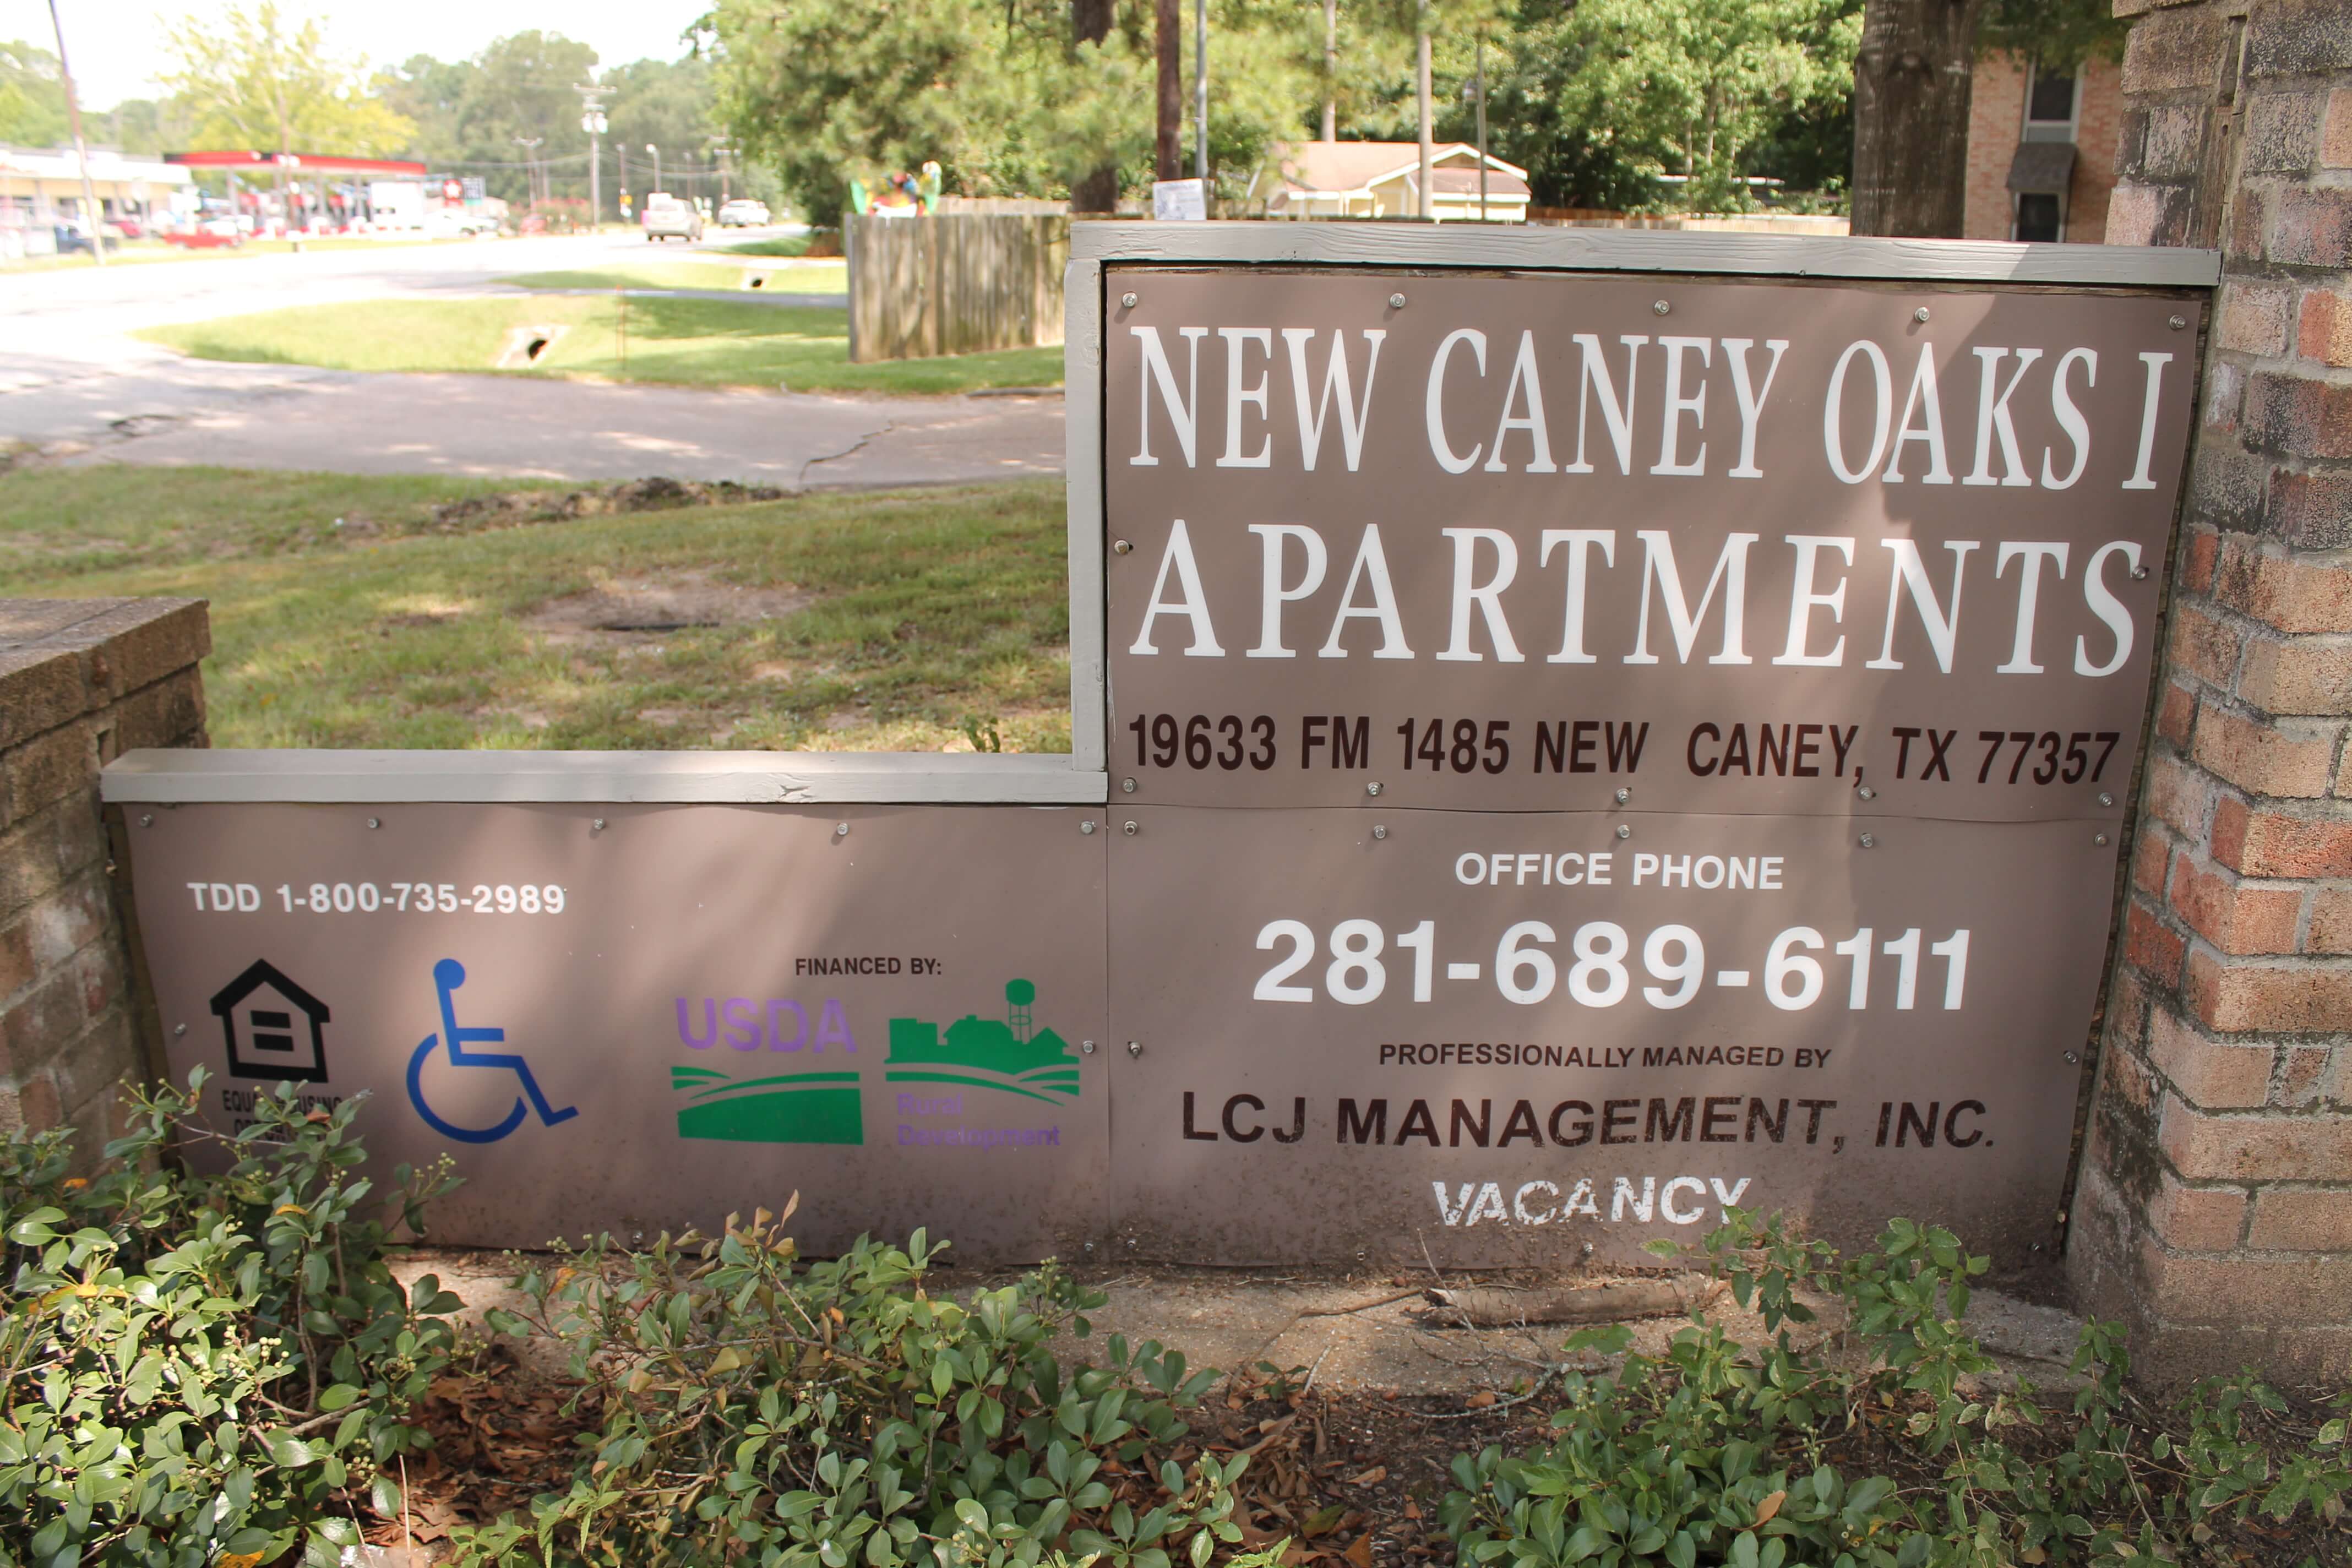 NEW CANEY OAKS APARTMENTS